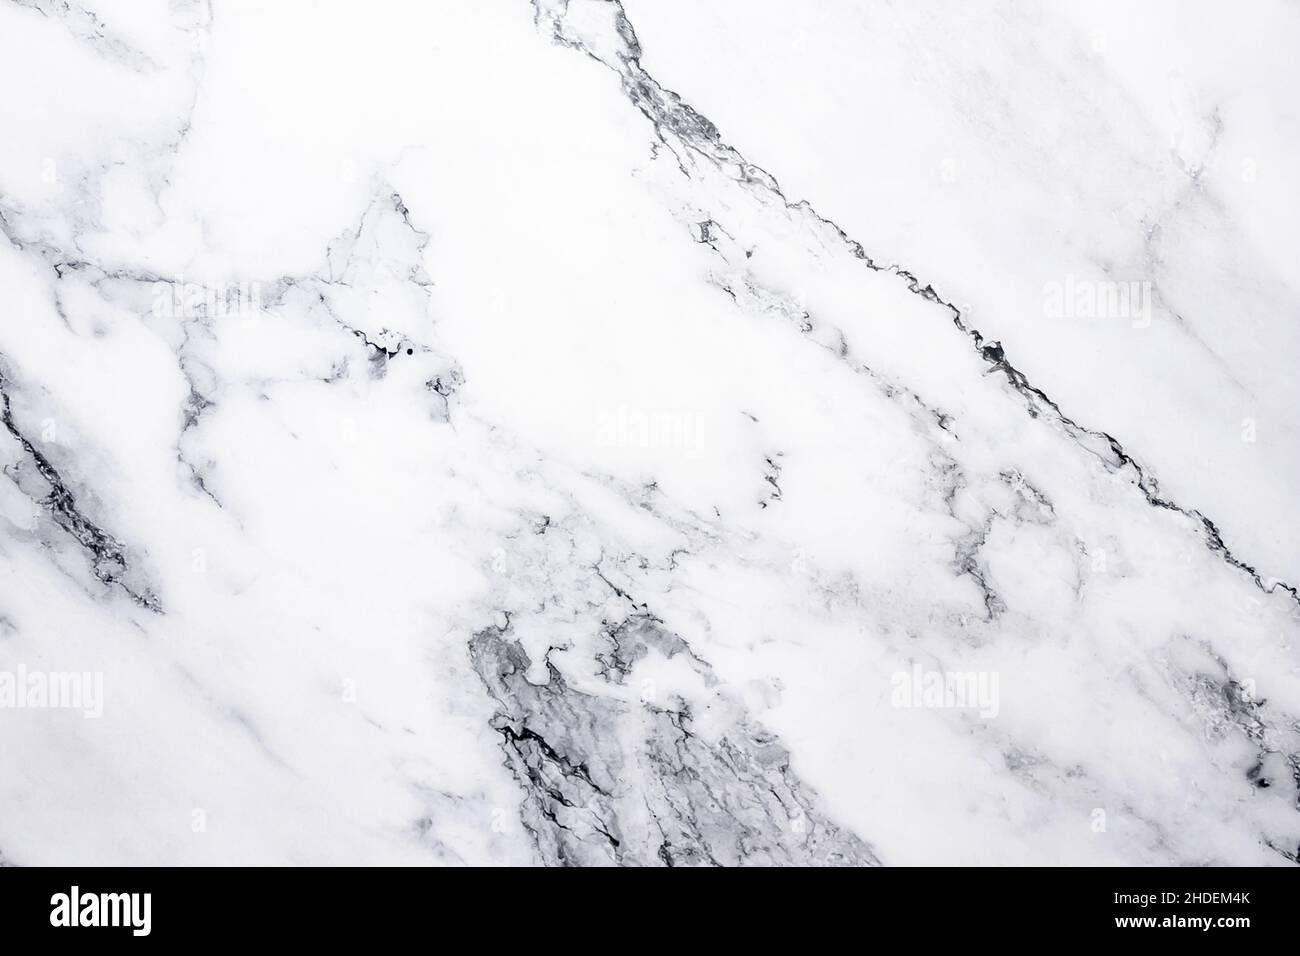 Marble floor. White marble surface, stone wall. Marbled texture. Abstract stained grunge background, pattern. Gray mineral slab. Grey natural wallpape Stock Photo